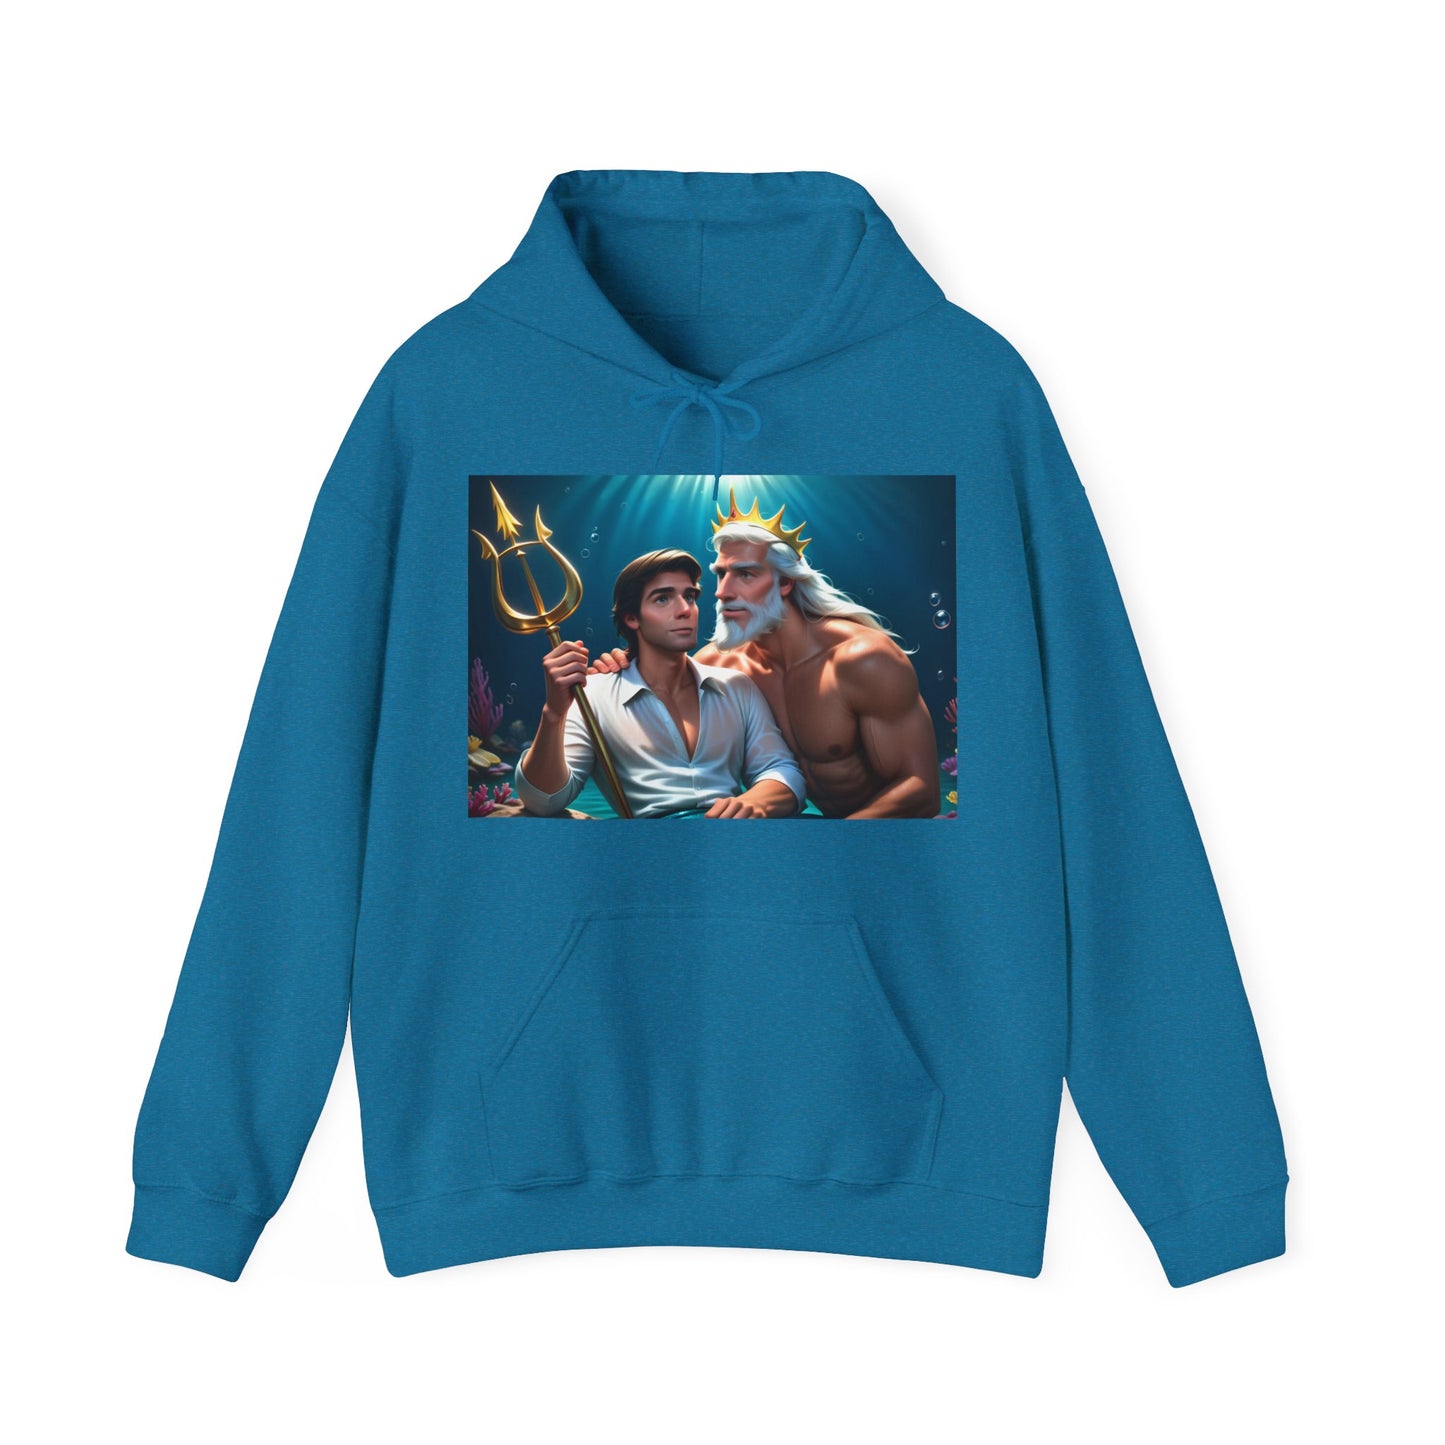 Antique Saphire Gay Prince Eric and gay daddy King Triton hoodie sweatshirt